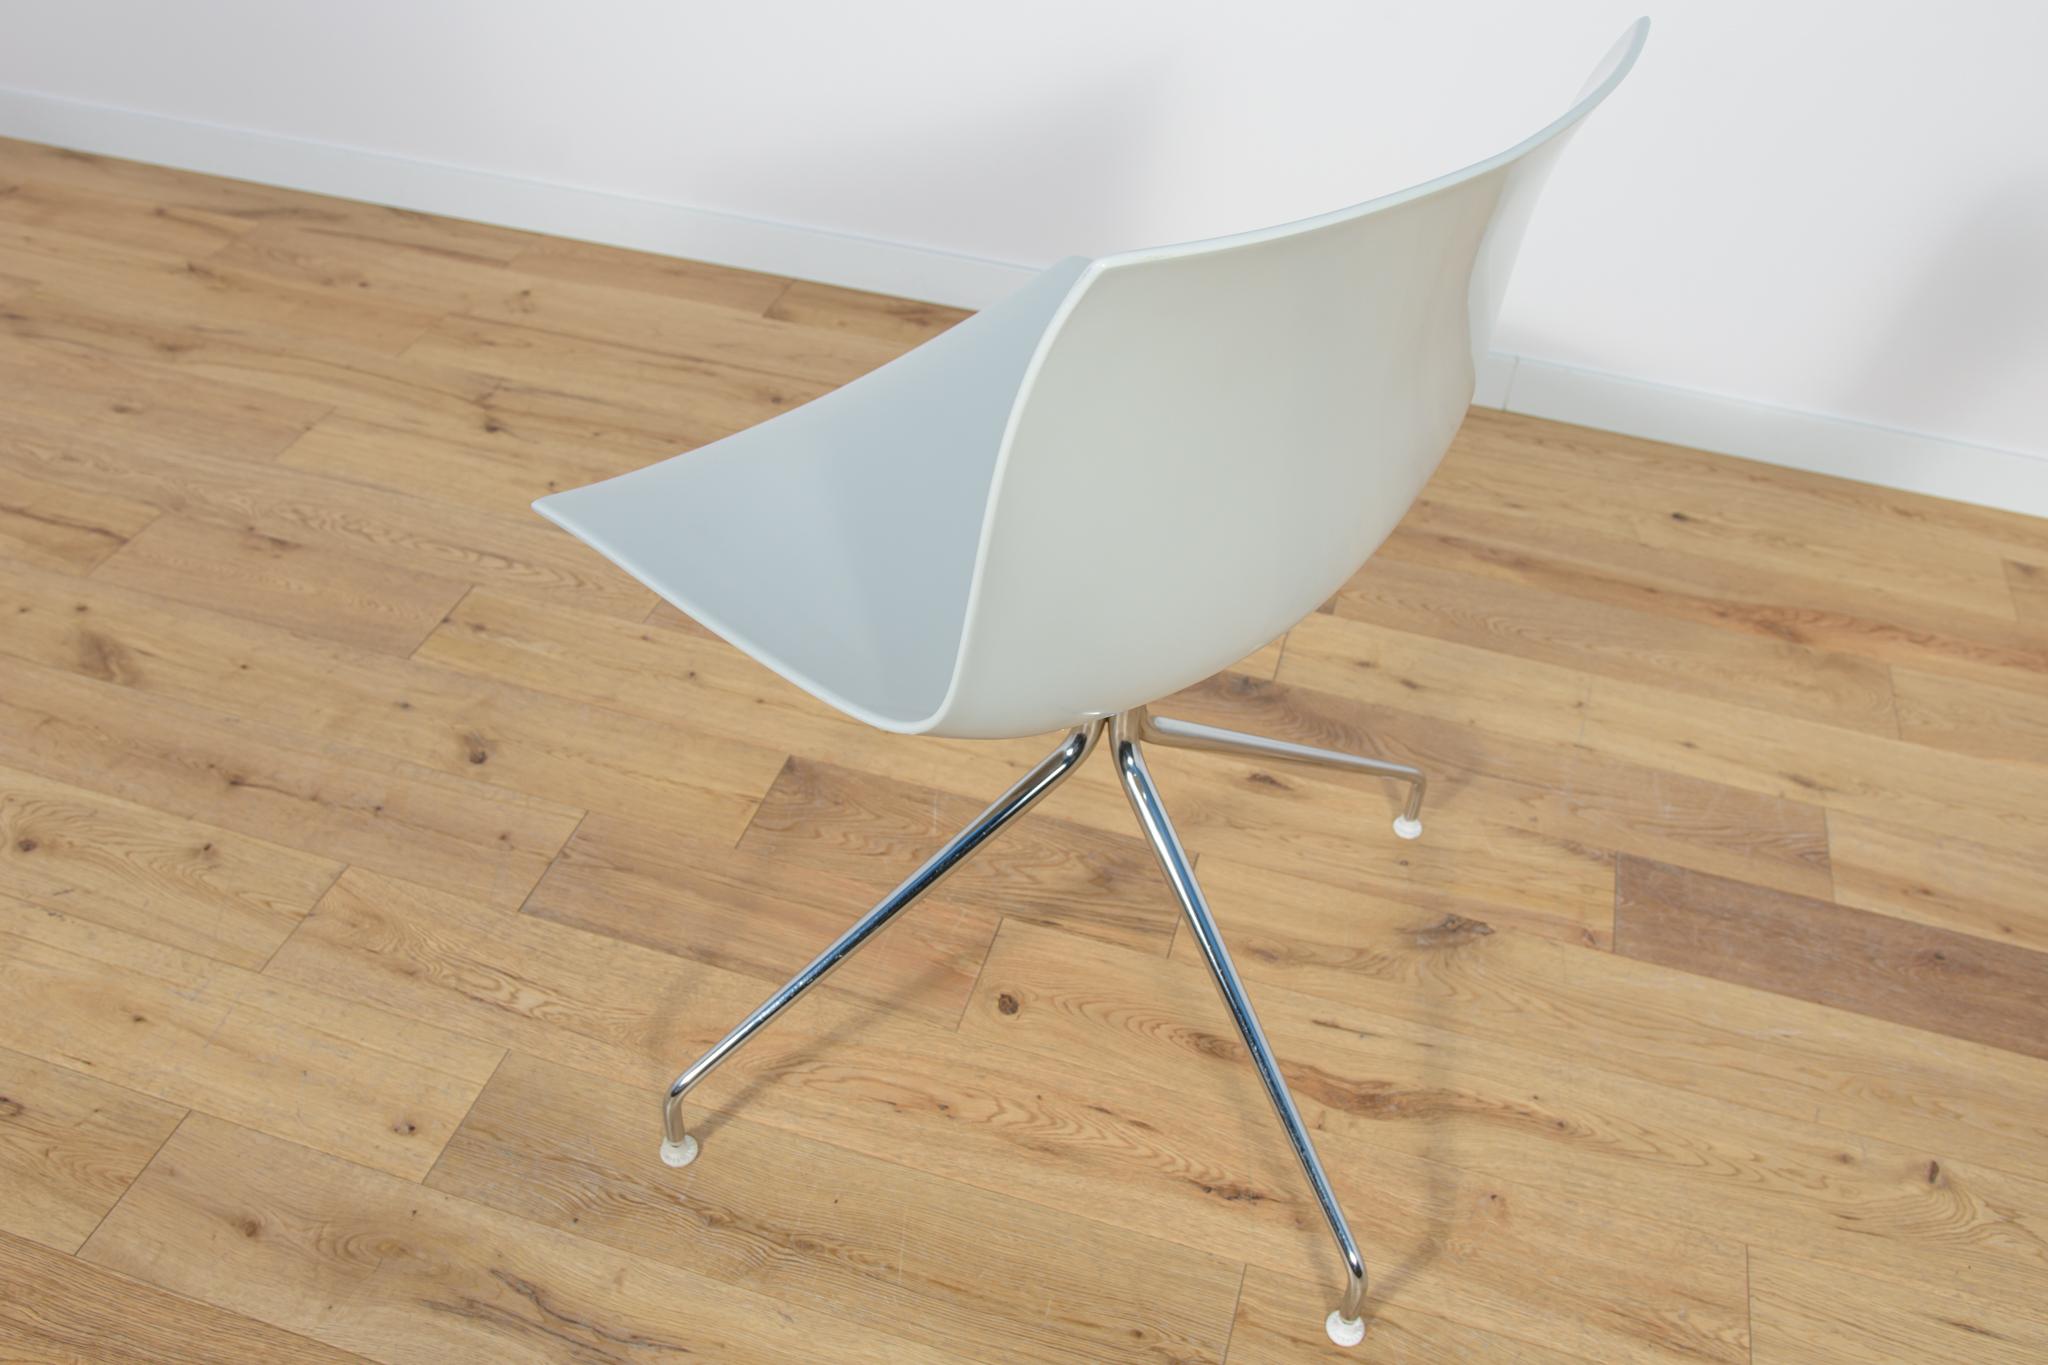 Contemporary Catifa 53 Desk Chair by Lievore Altherr Molina for Arper, 2000s For Sale